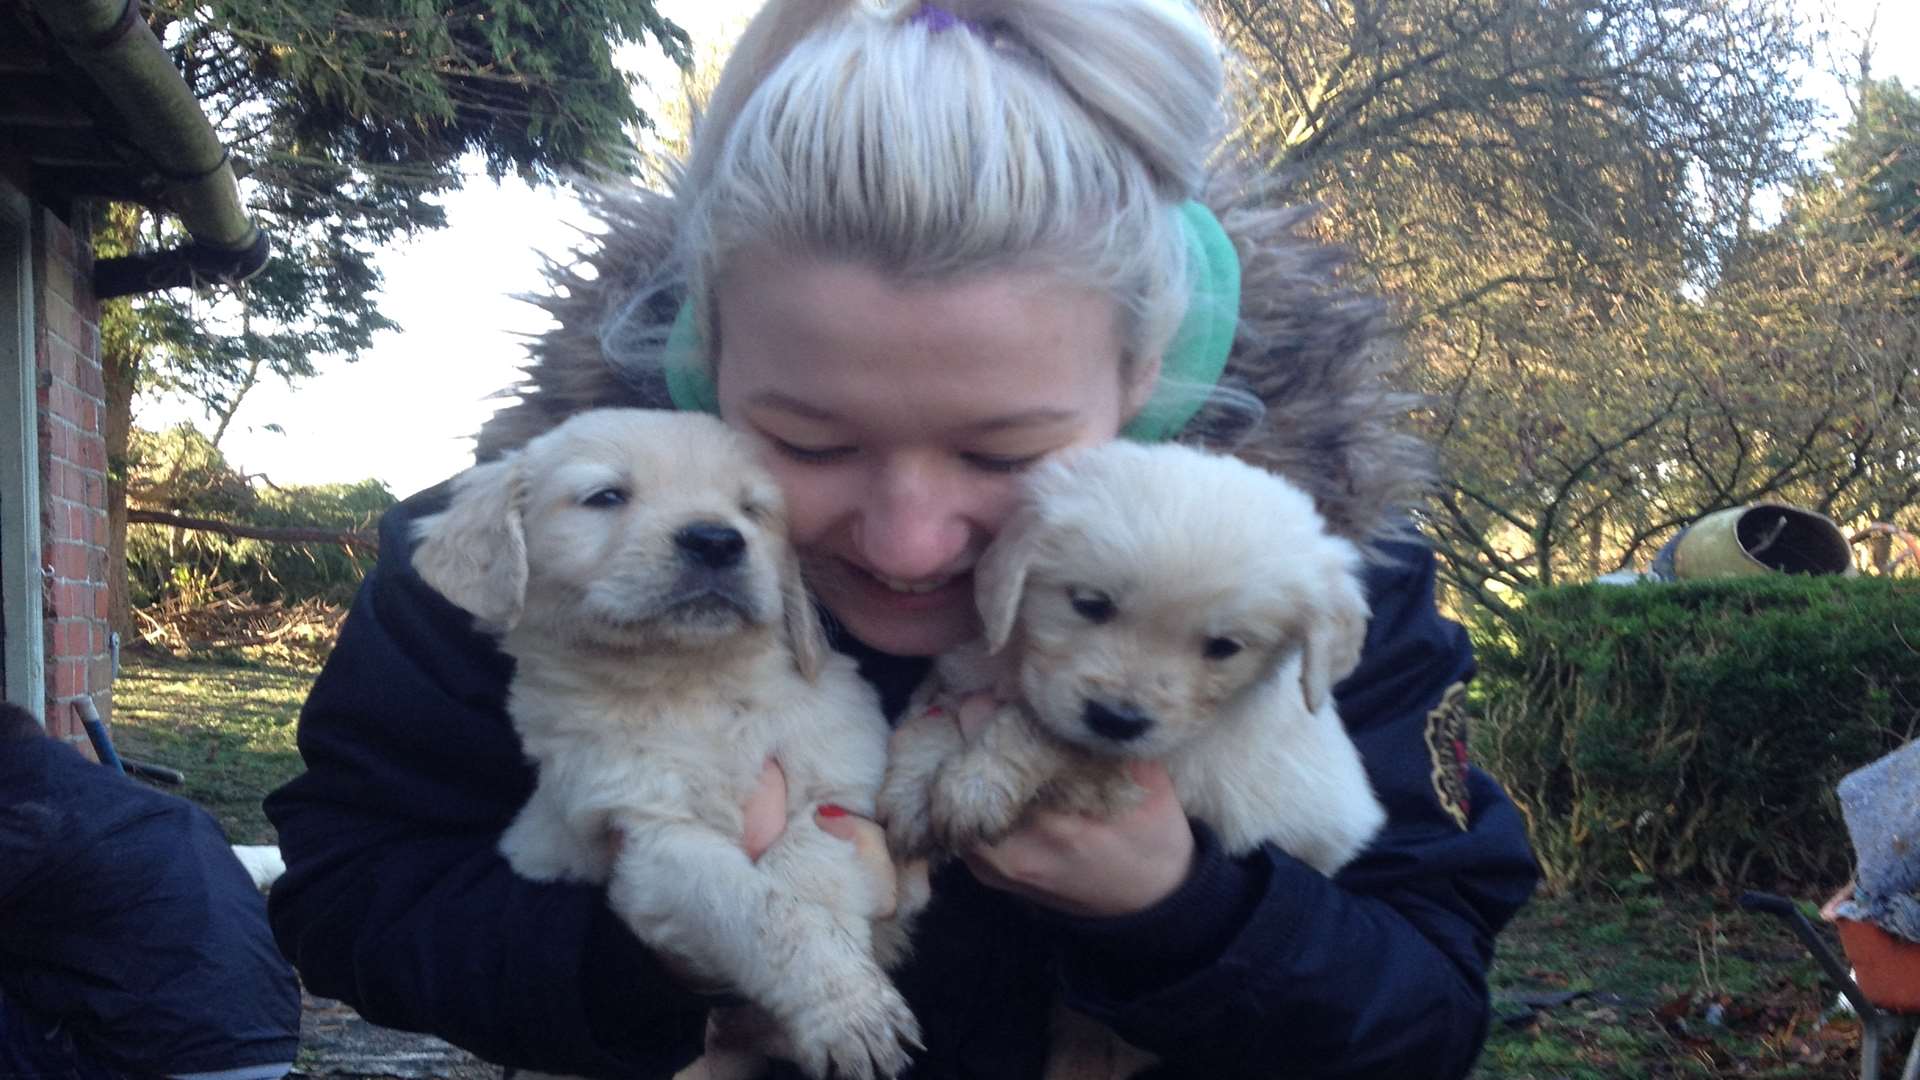 Mrs Kennedy's daughter, Jasmin Spinks, with two of the stolen puppies